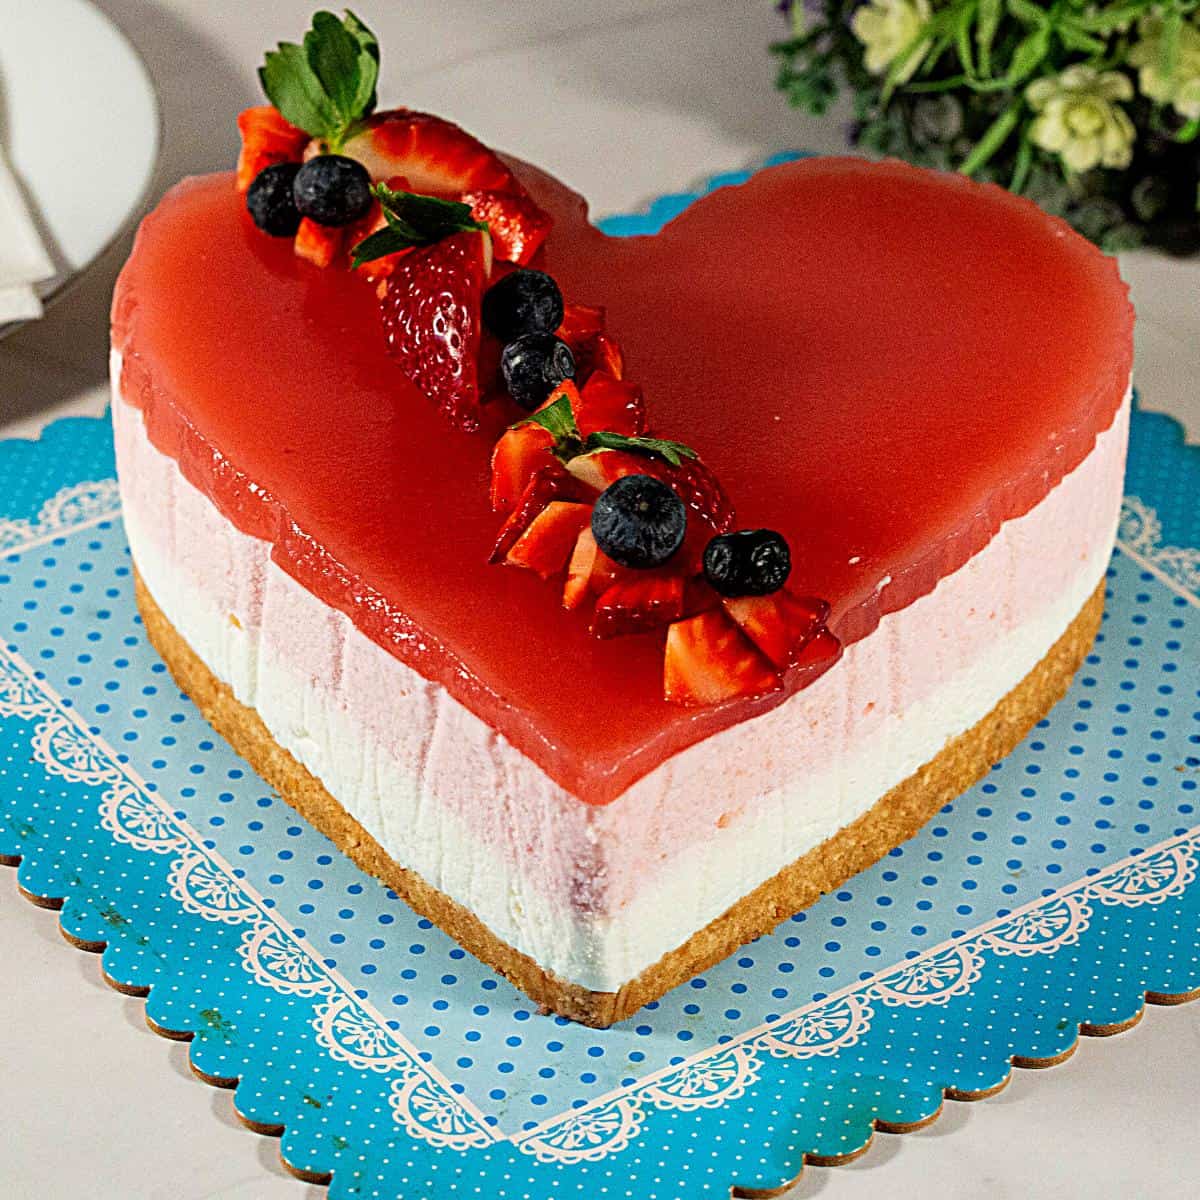 A heart cake on the board.